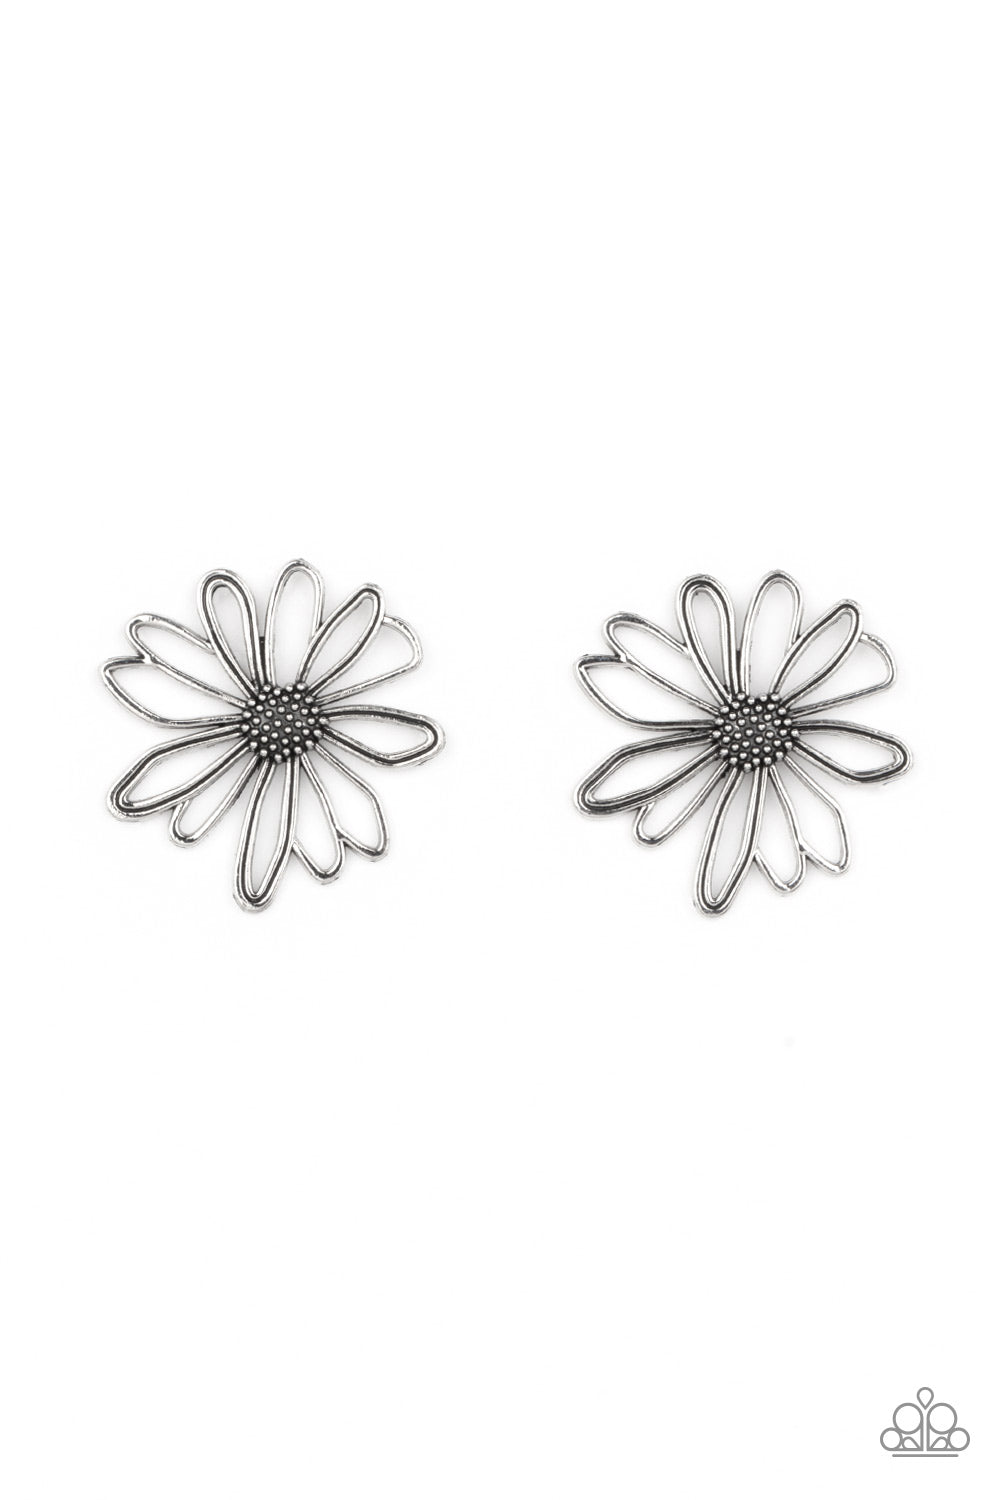 Artisan Arbor Silver Flower Earrings - Paparazzi Jewelry - Bejeweled Accessories By Kristie - Silver petals bloom from a silver center for a rustic flower stylish design earrings. Earring attaches to a standard post fitting.